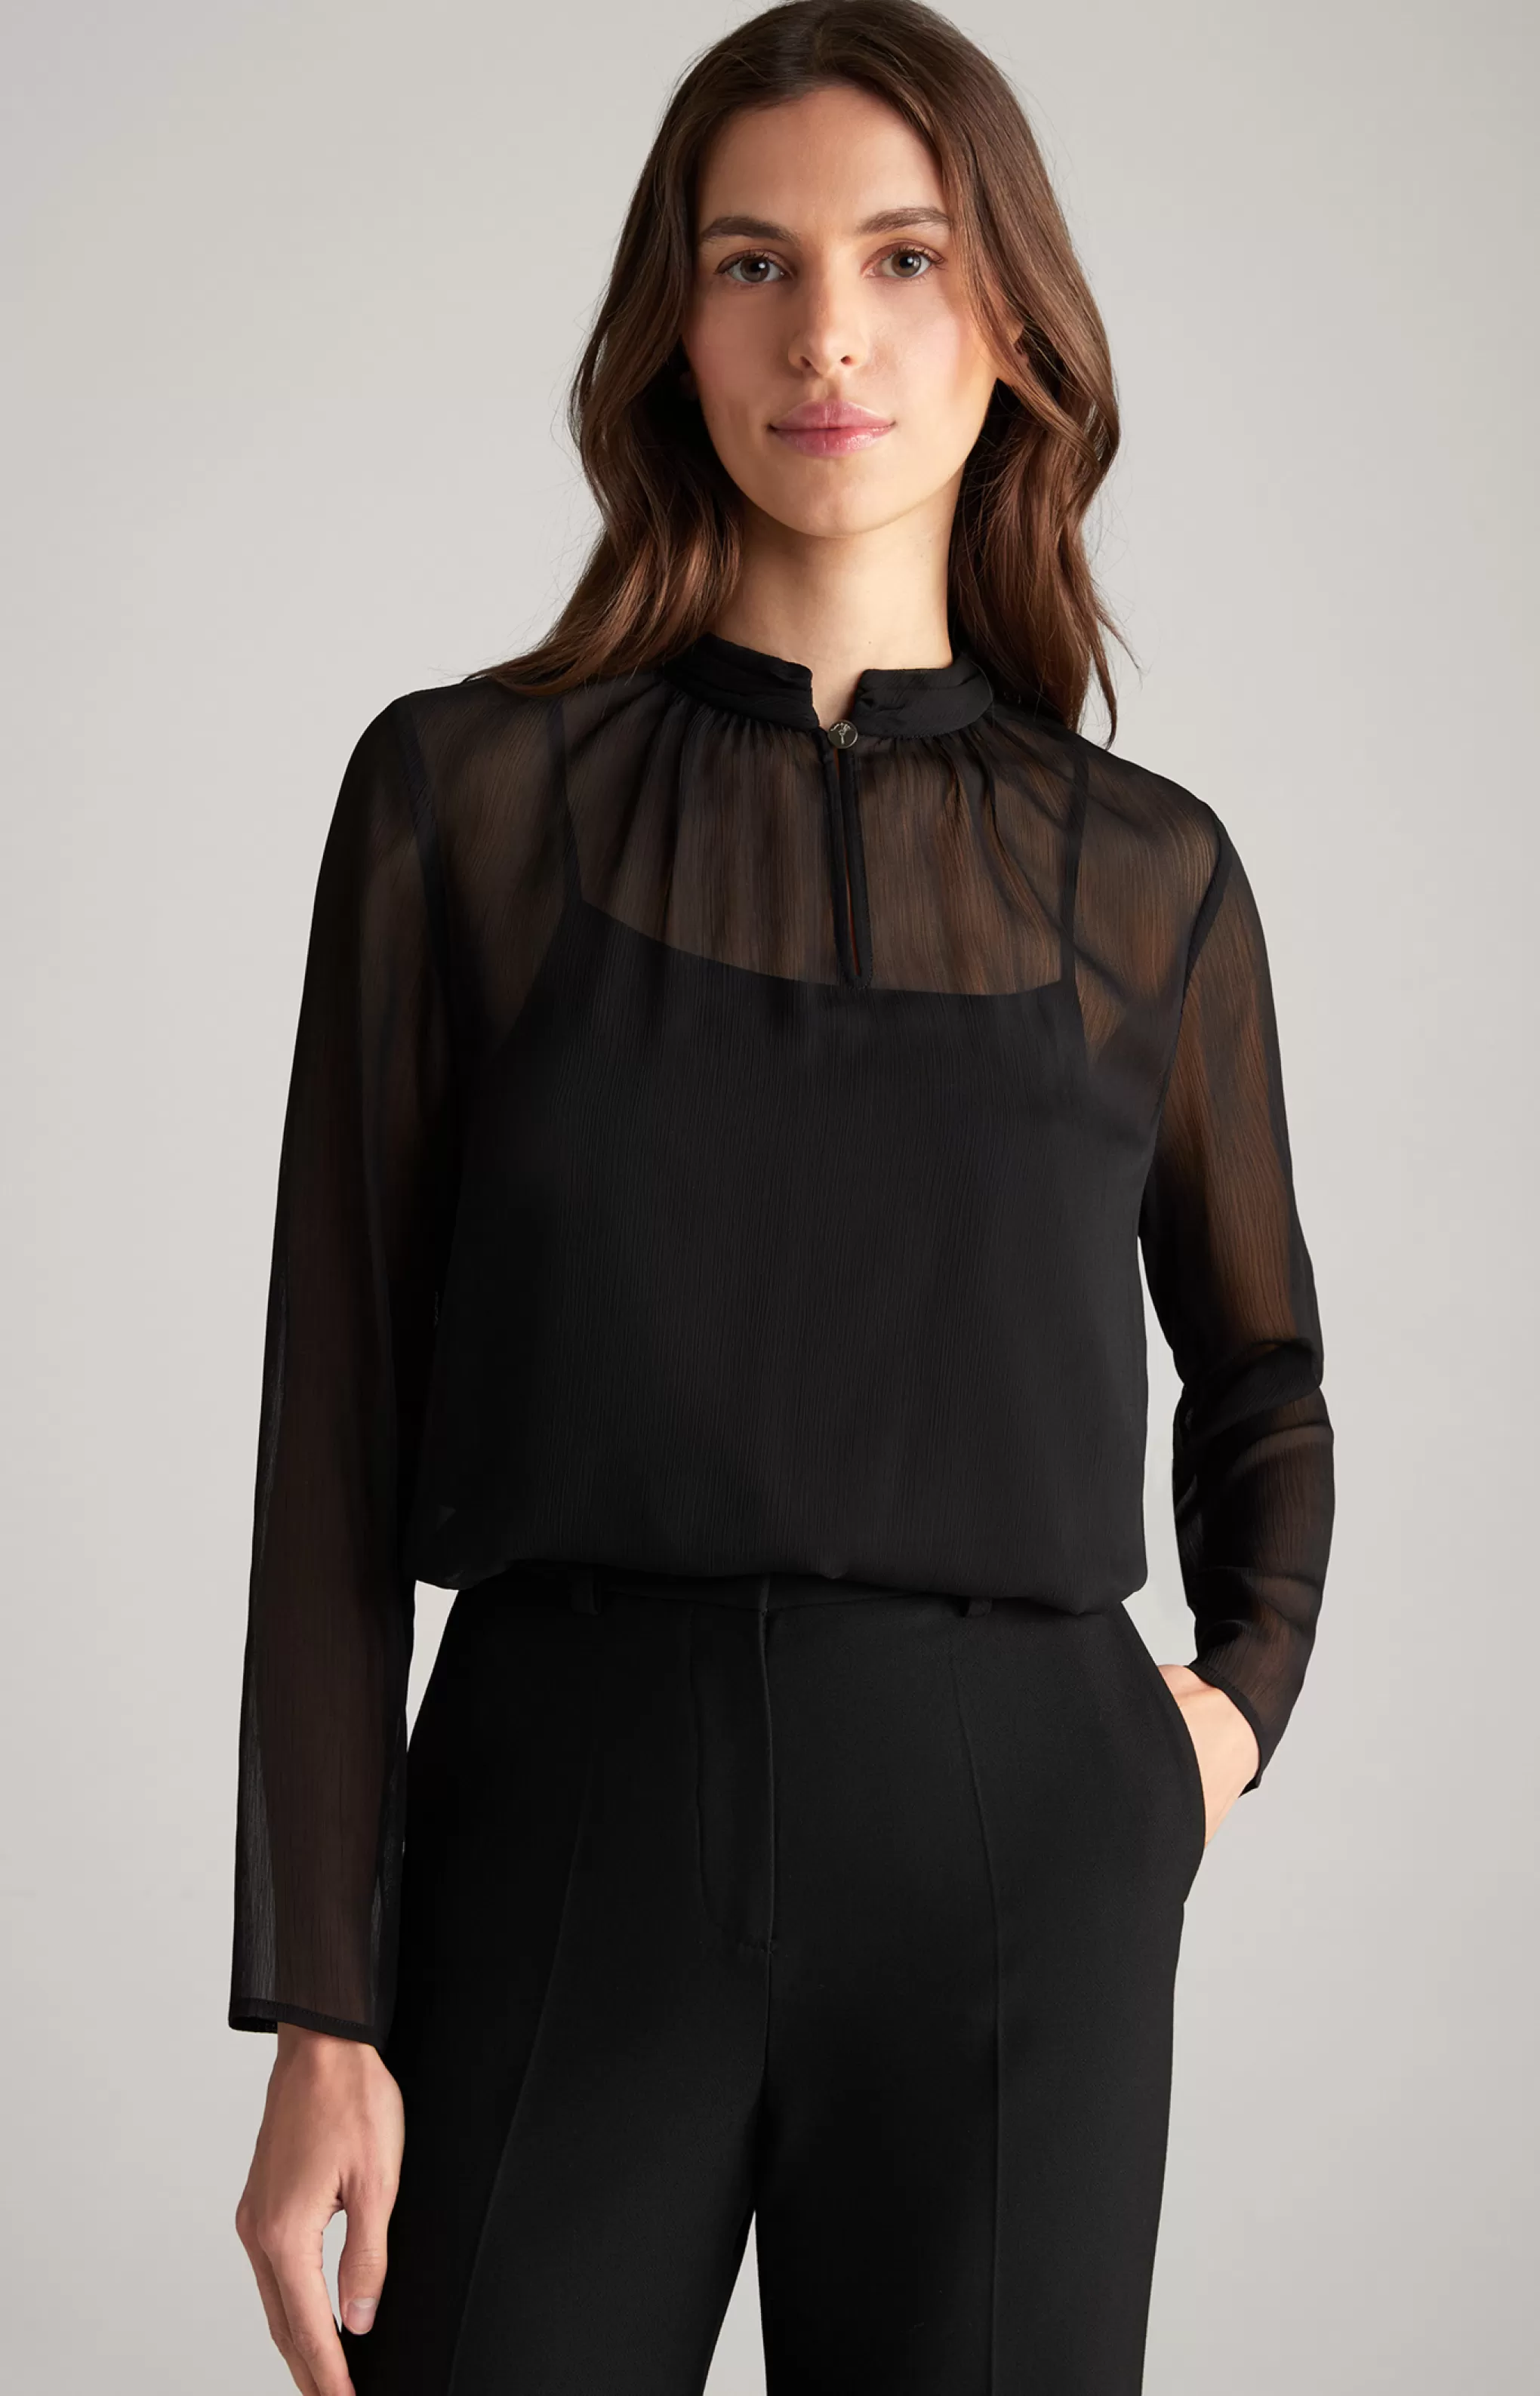 Blouses | Clothing*JOOP Blouses | Clothing Chiffon Blouse in